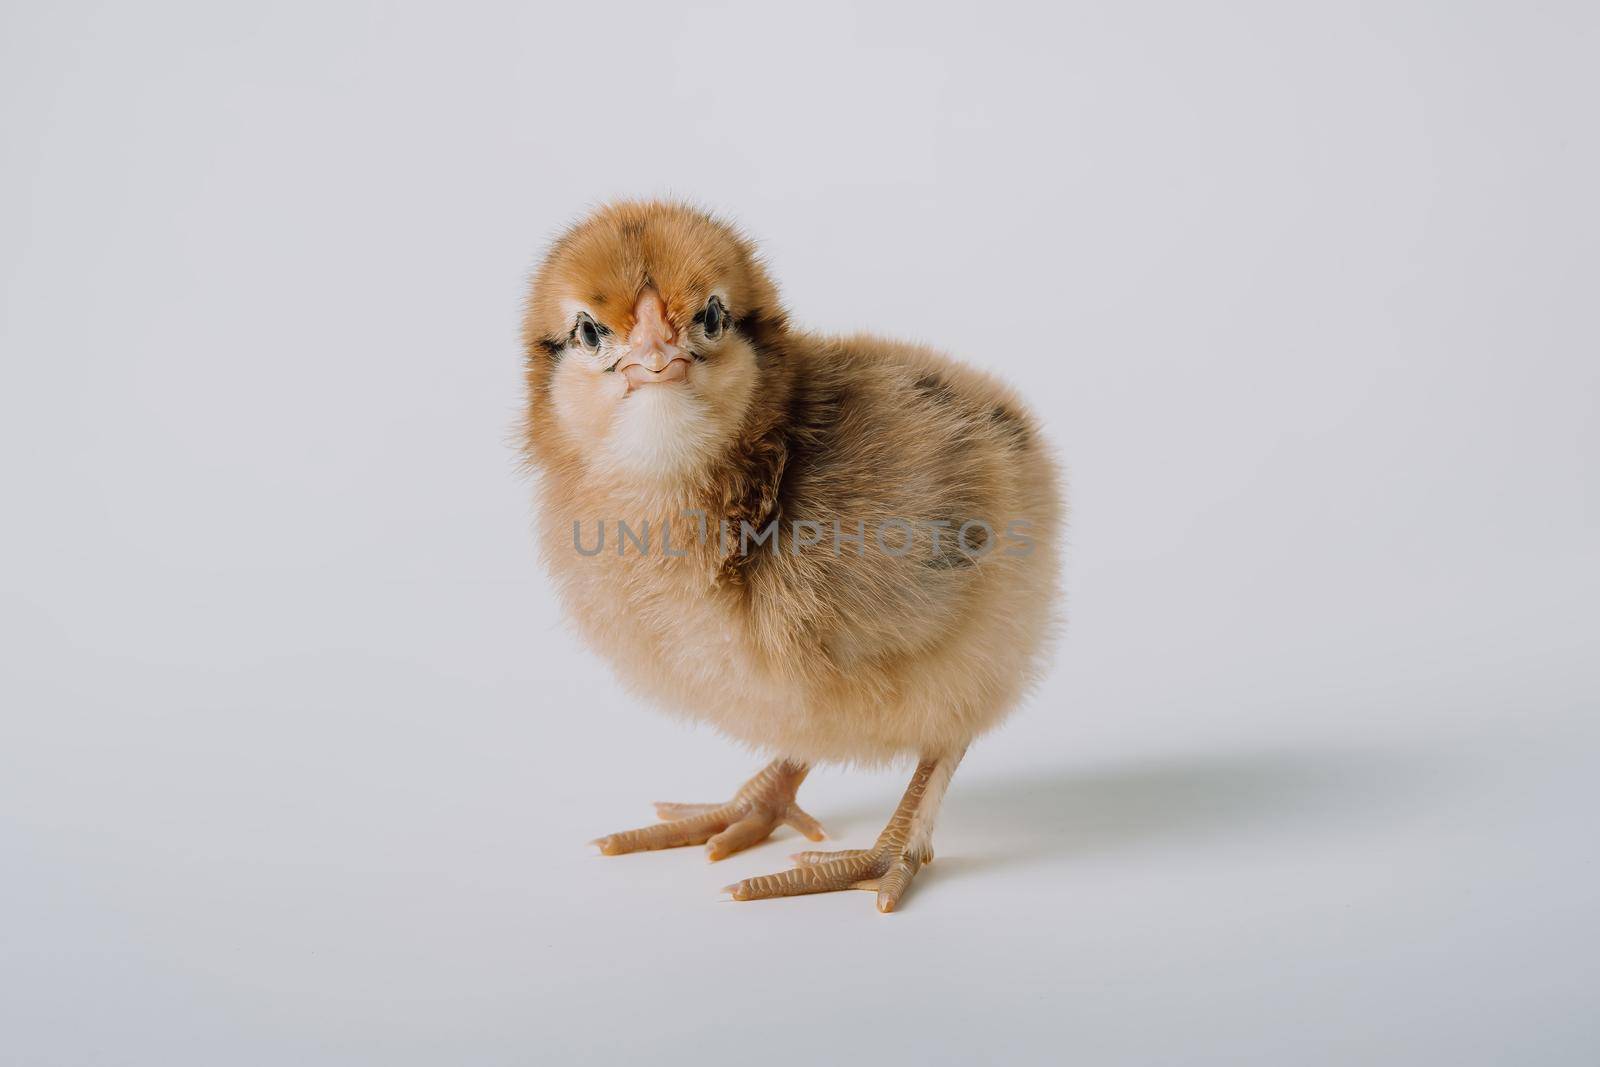 Beautiful pockmarked adorable little chick for design decorative theme. Newborn poultry yellow chicken beak on light studio background. Easter, farm concept by kristina_kokhanova